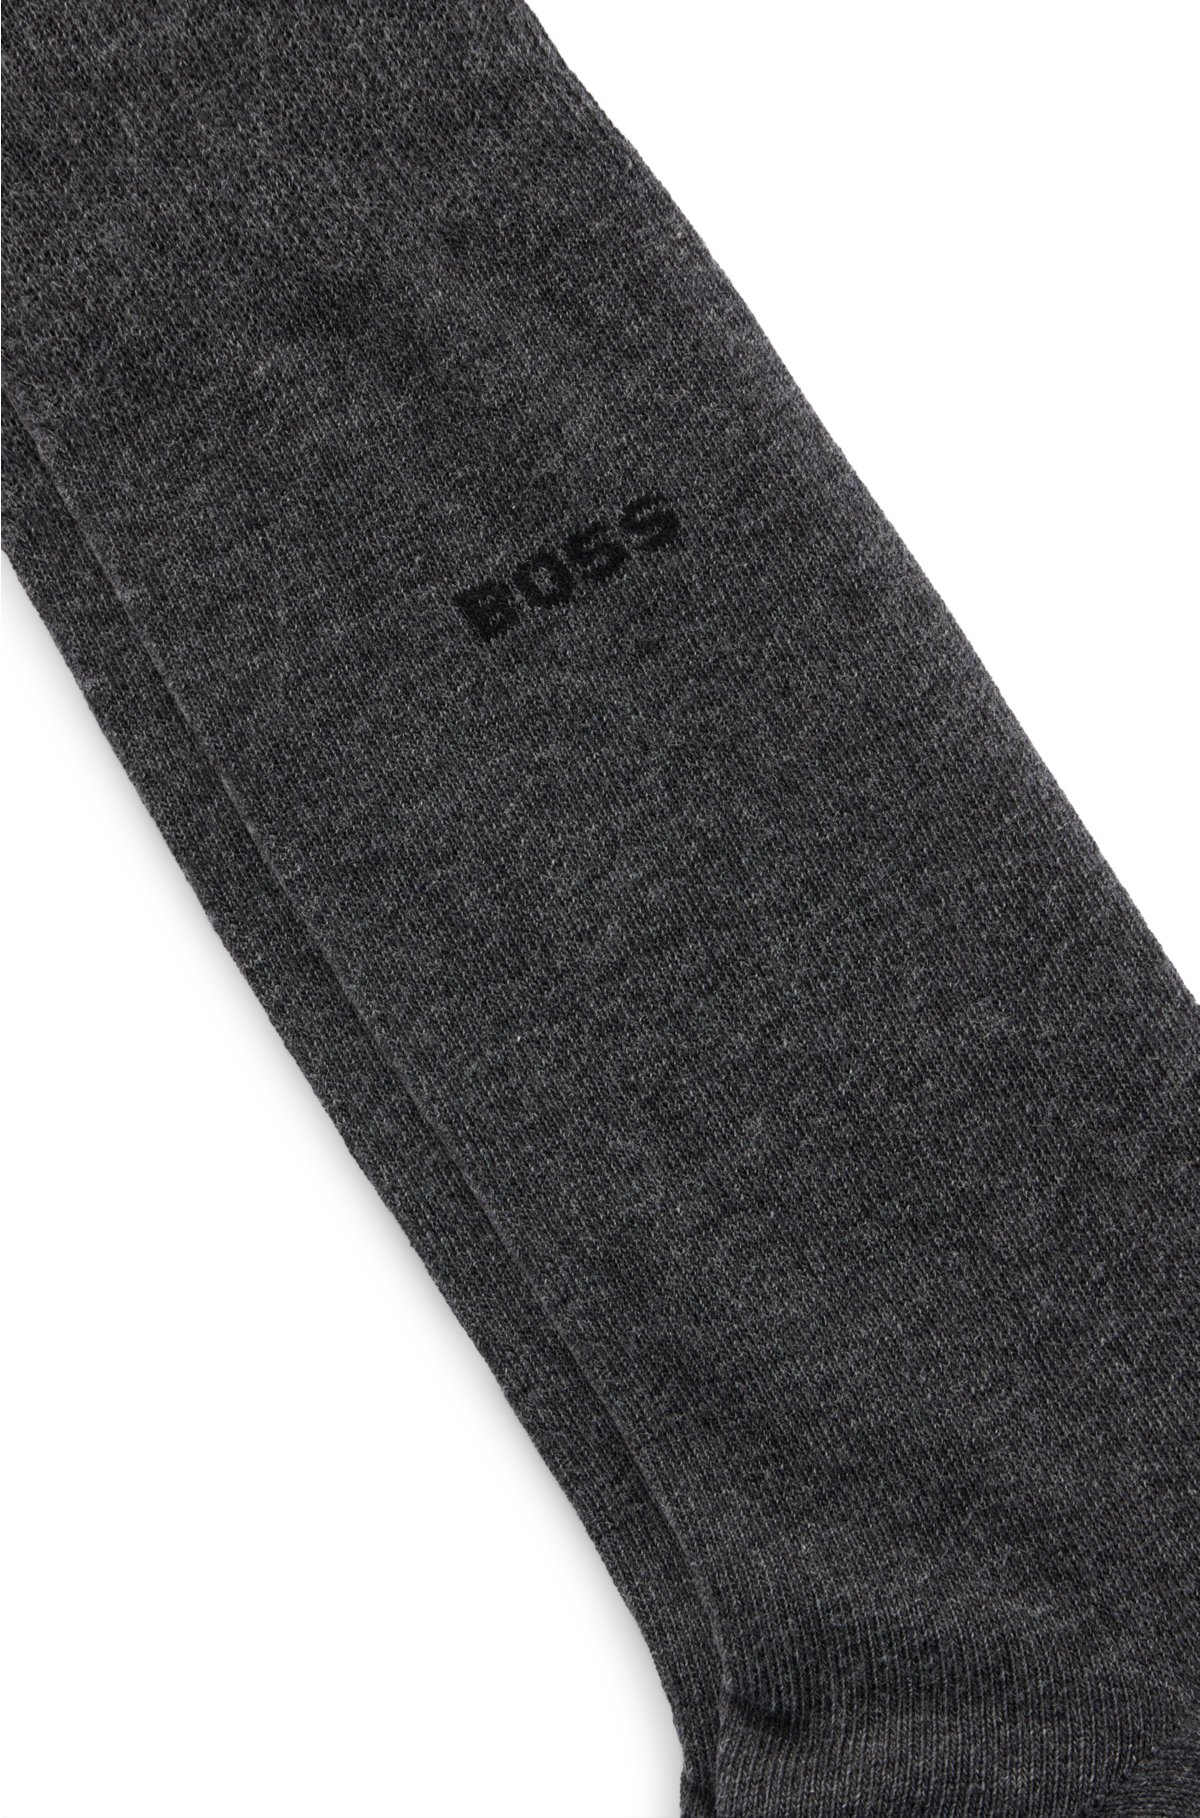 Two-pack of regular-length socks in a cotton blend, Grey